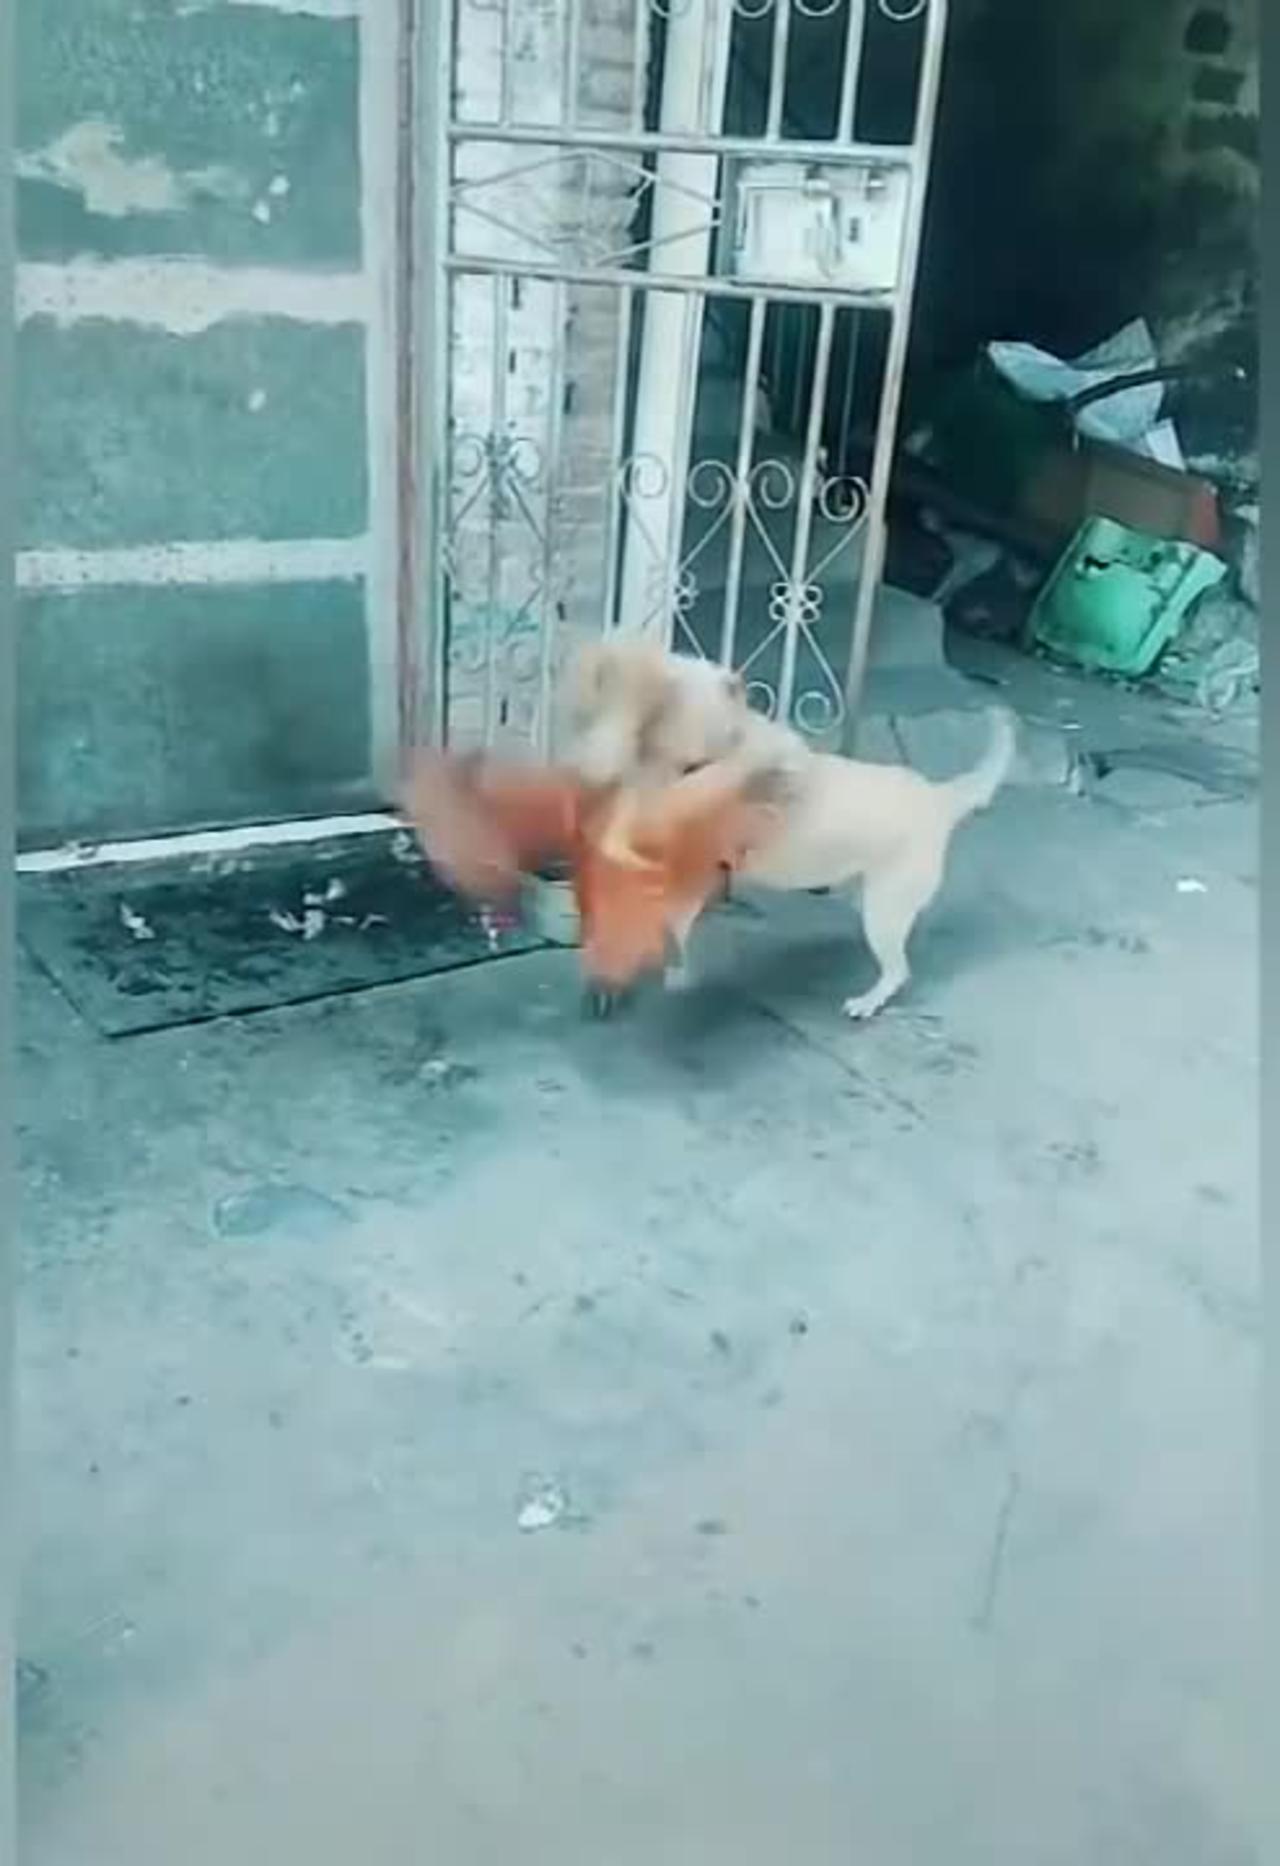 Chicken and dog funny 🤣 video 🤣